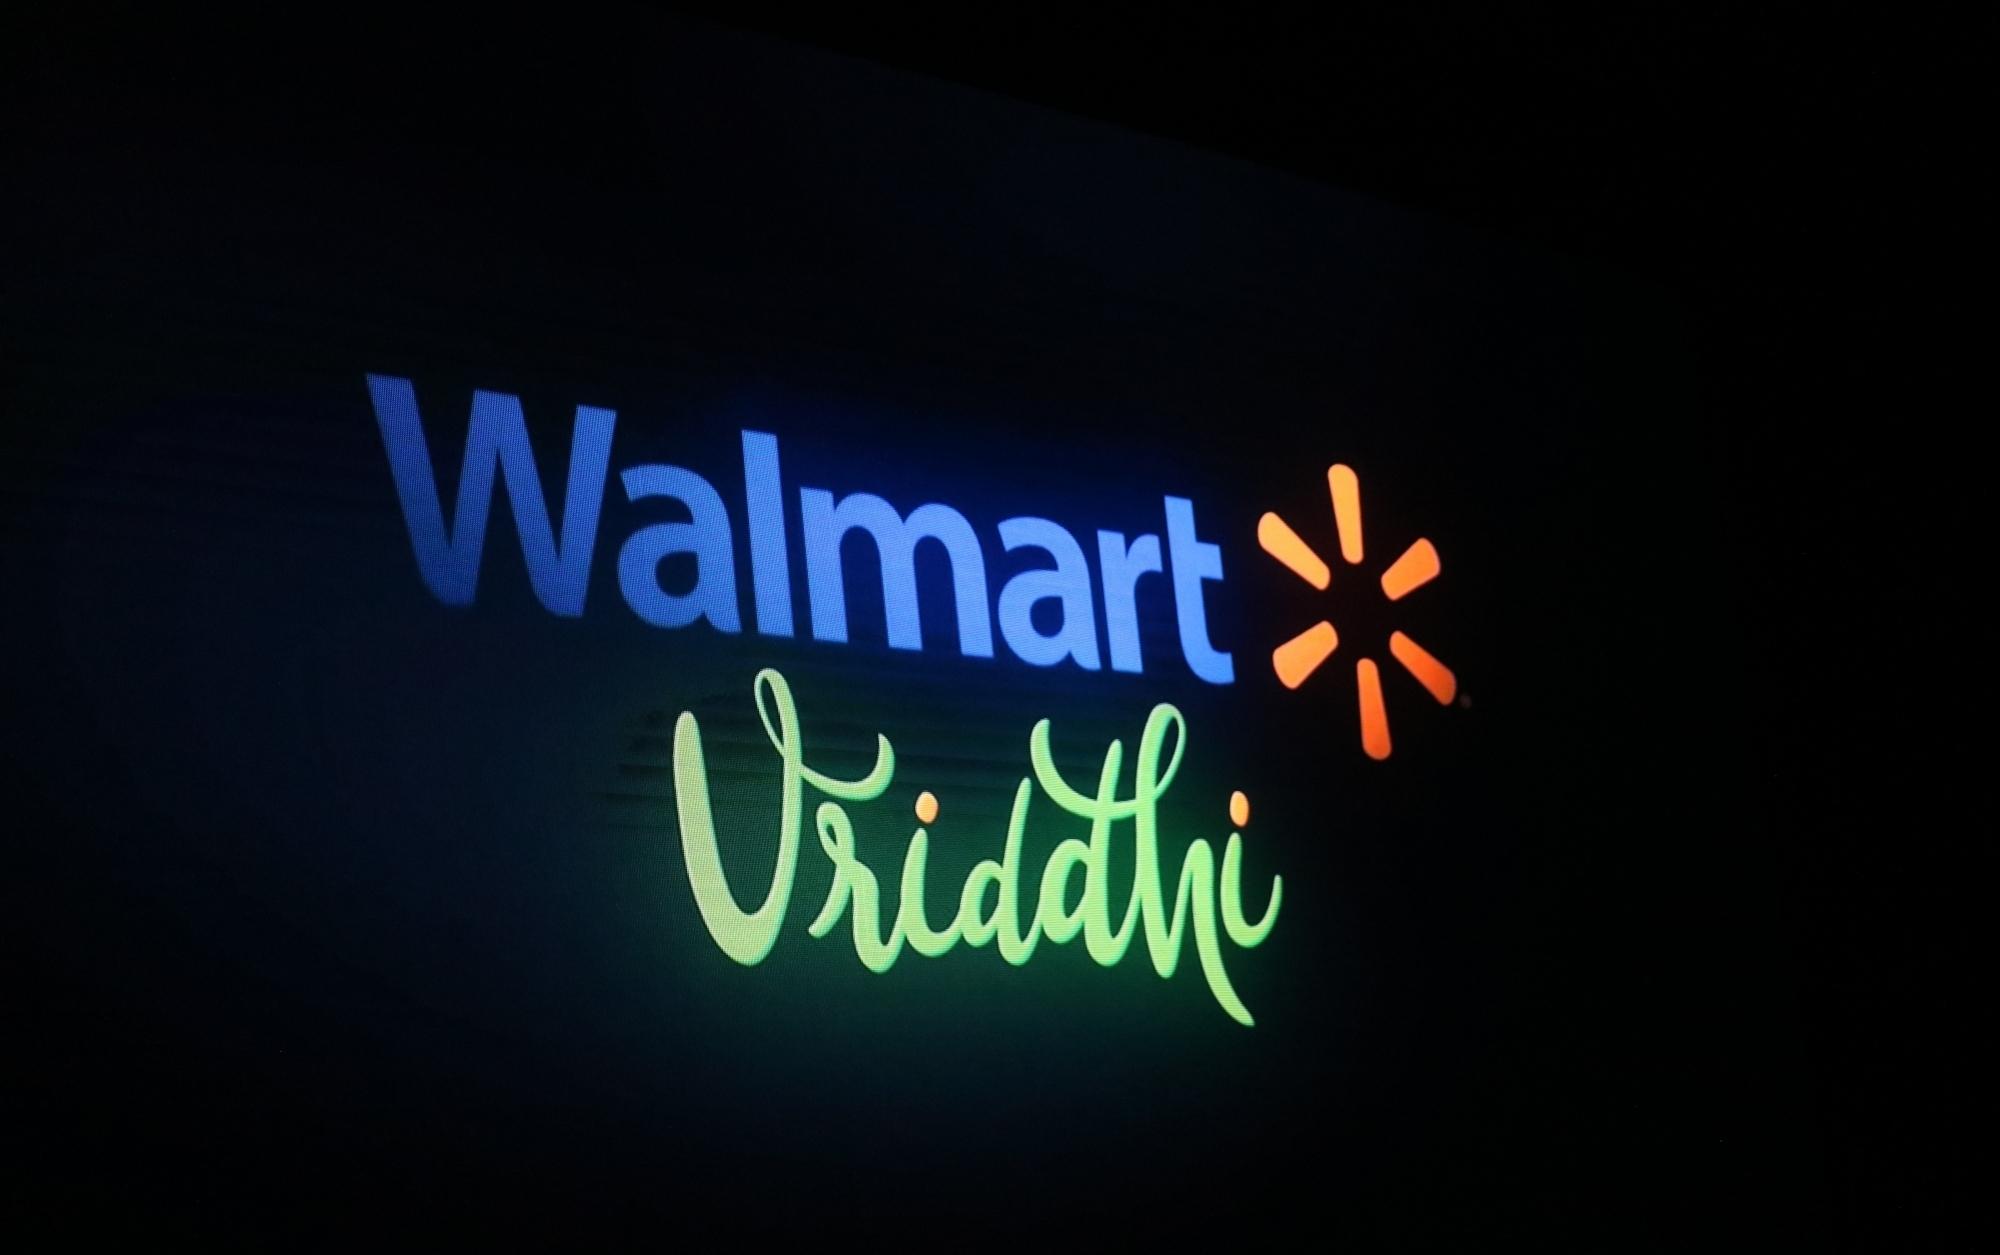 Walmart's 'Vriddhi' will give India's MSME booster dose